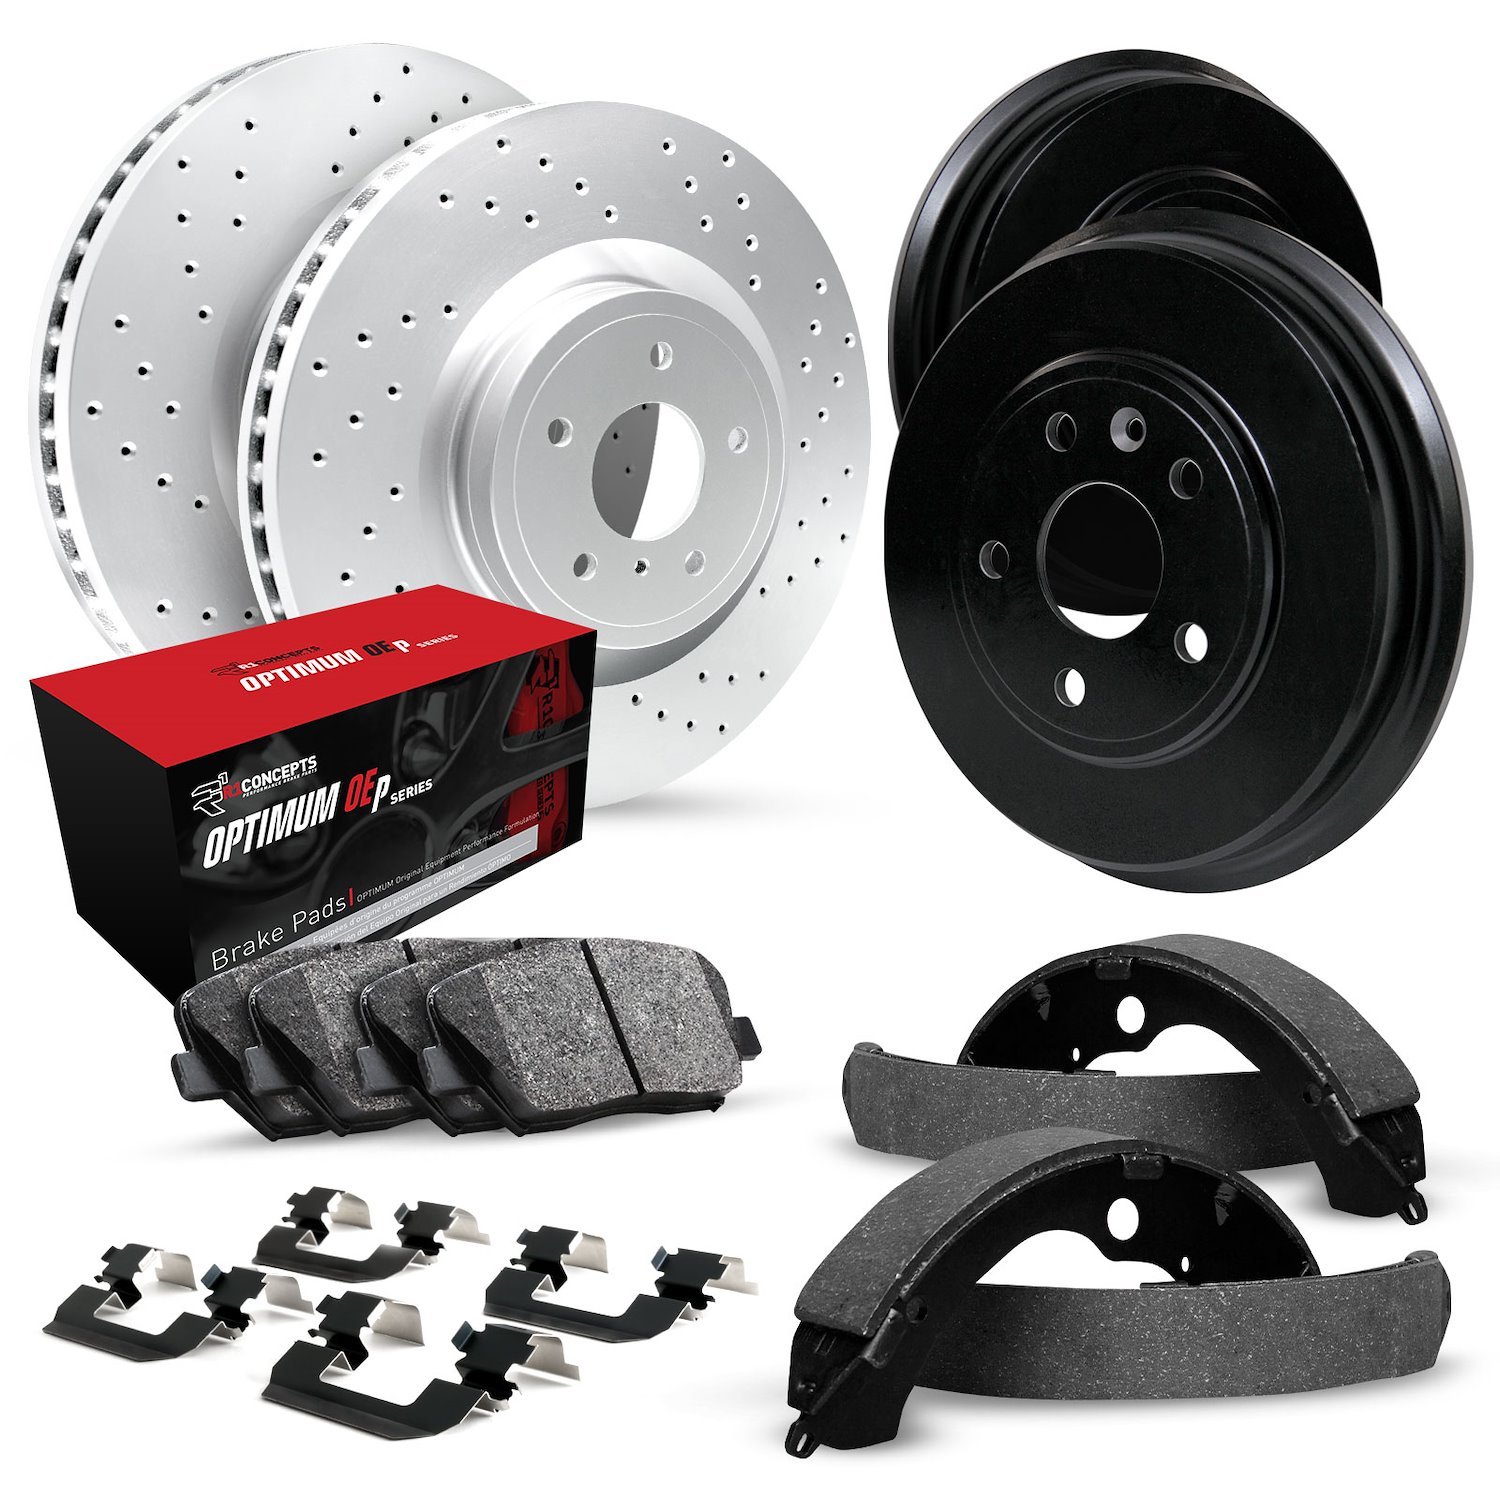 GEO-Carbon Drilled Brake Rotor & Drum Set w/Optimum OE Pads, Shoes, & Hardware, 1987-1988 GM, Position: Front & Rear